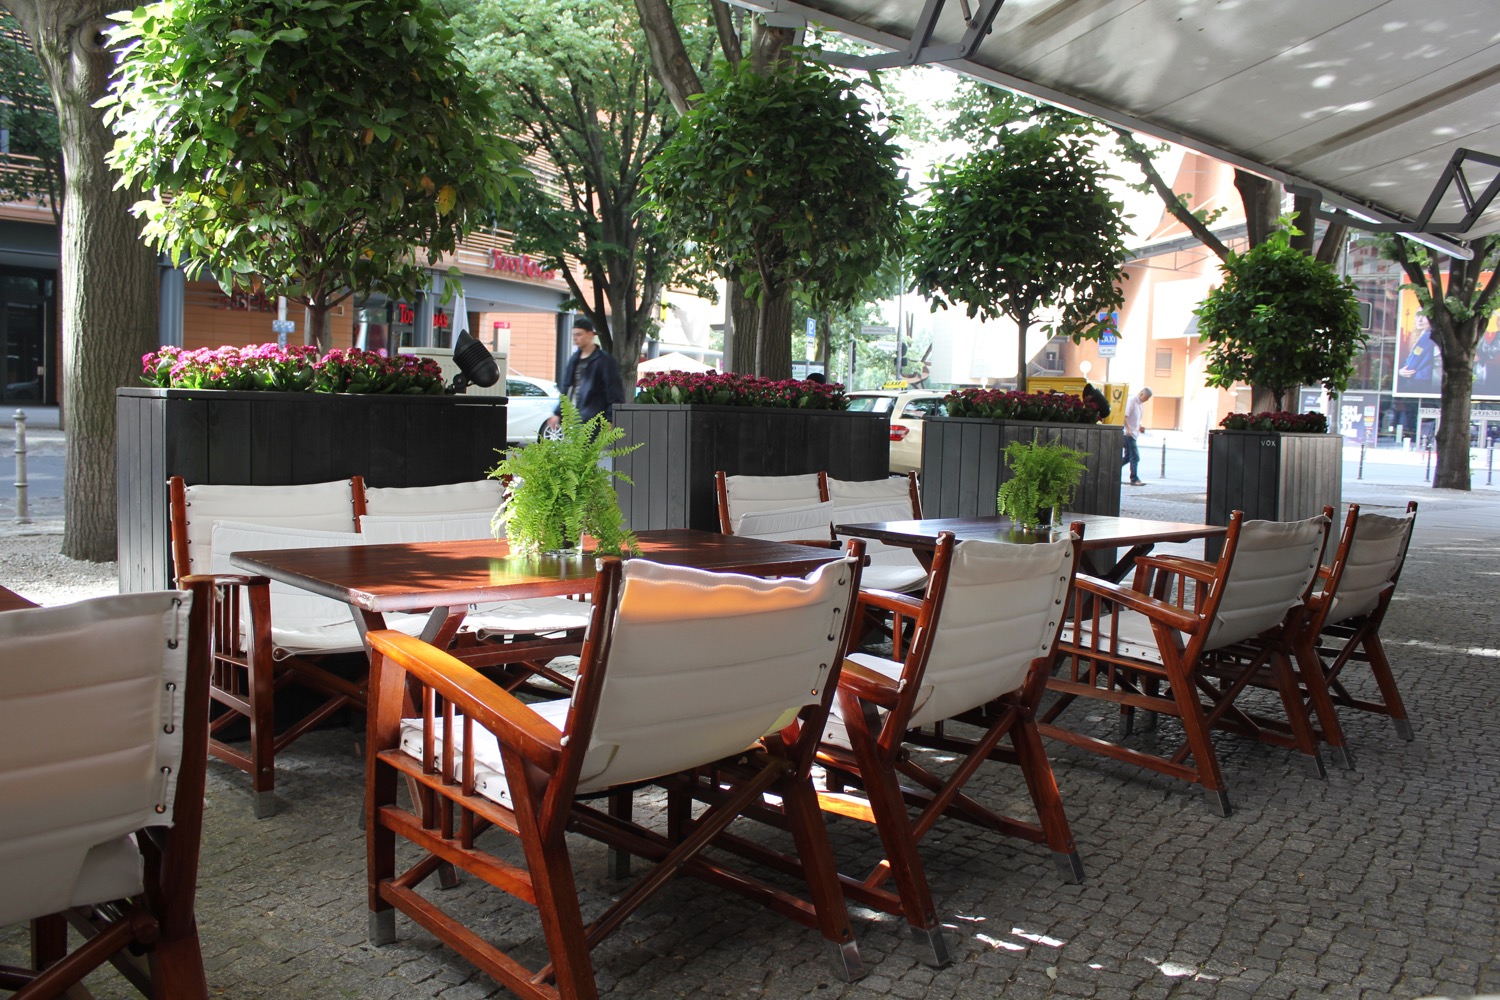 a table and chairs outside with trees and plants